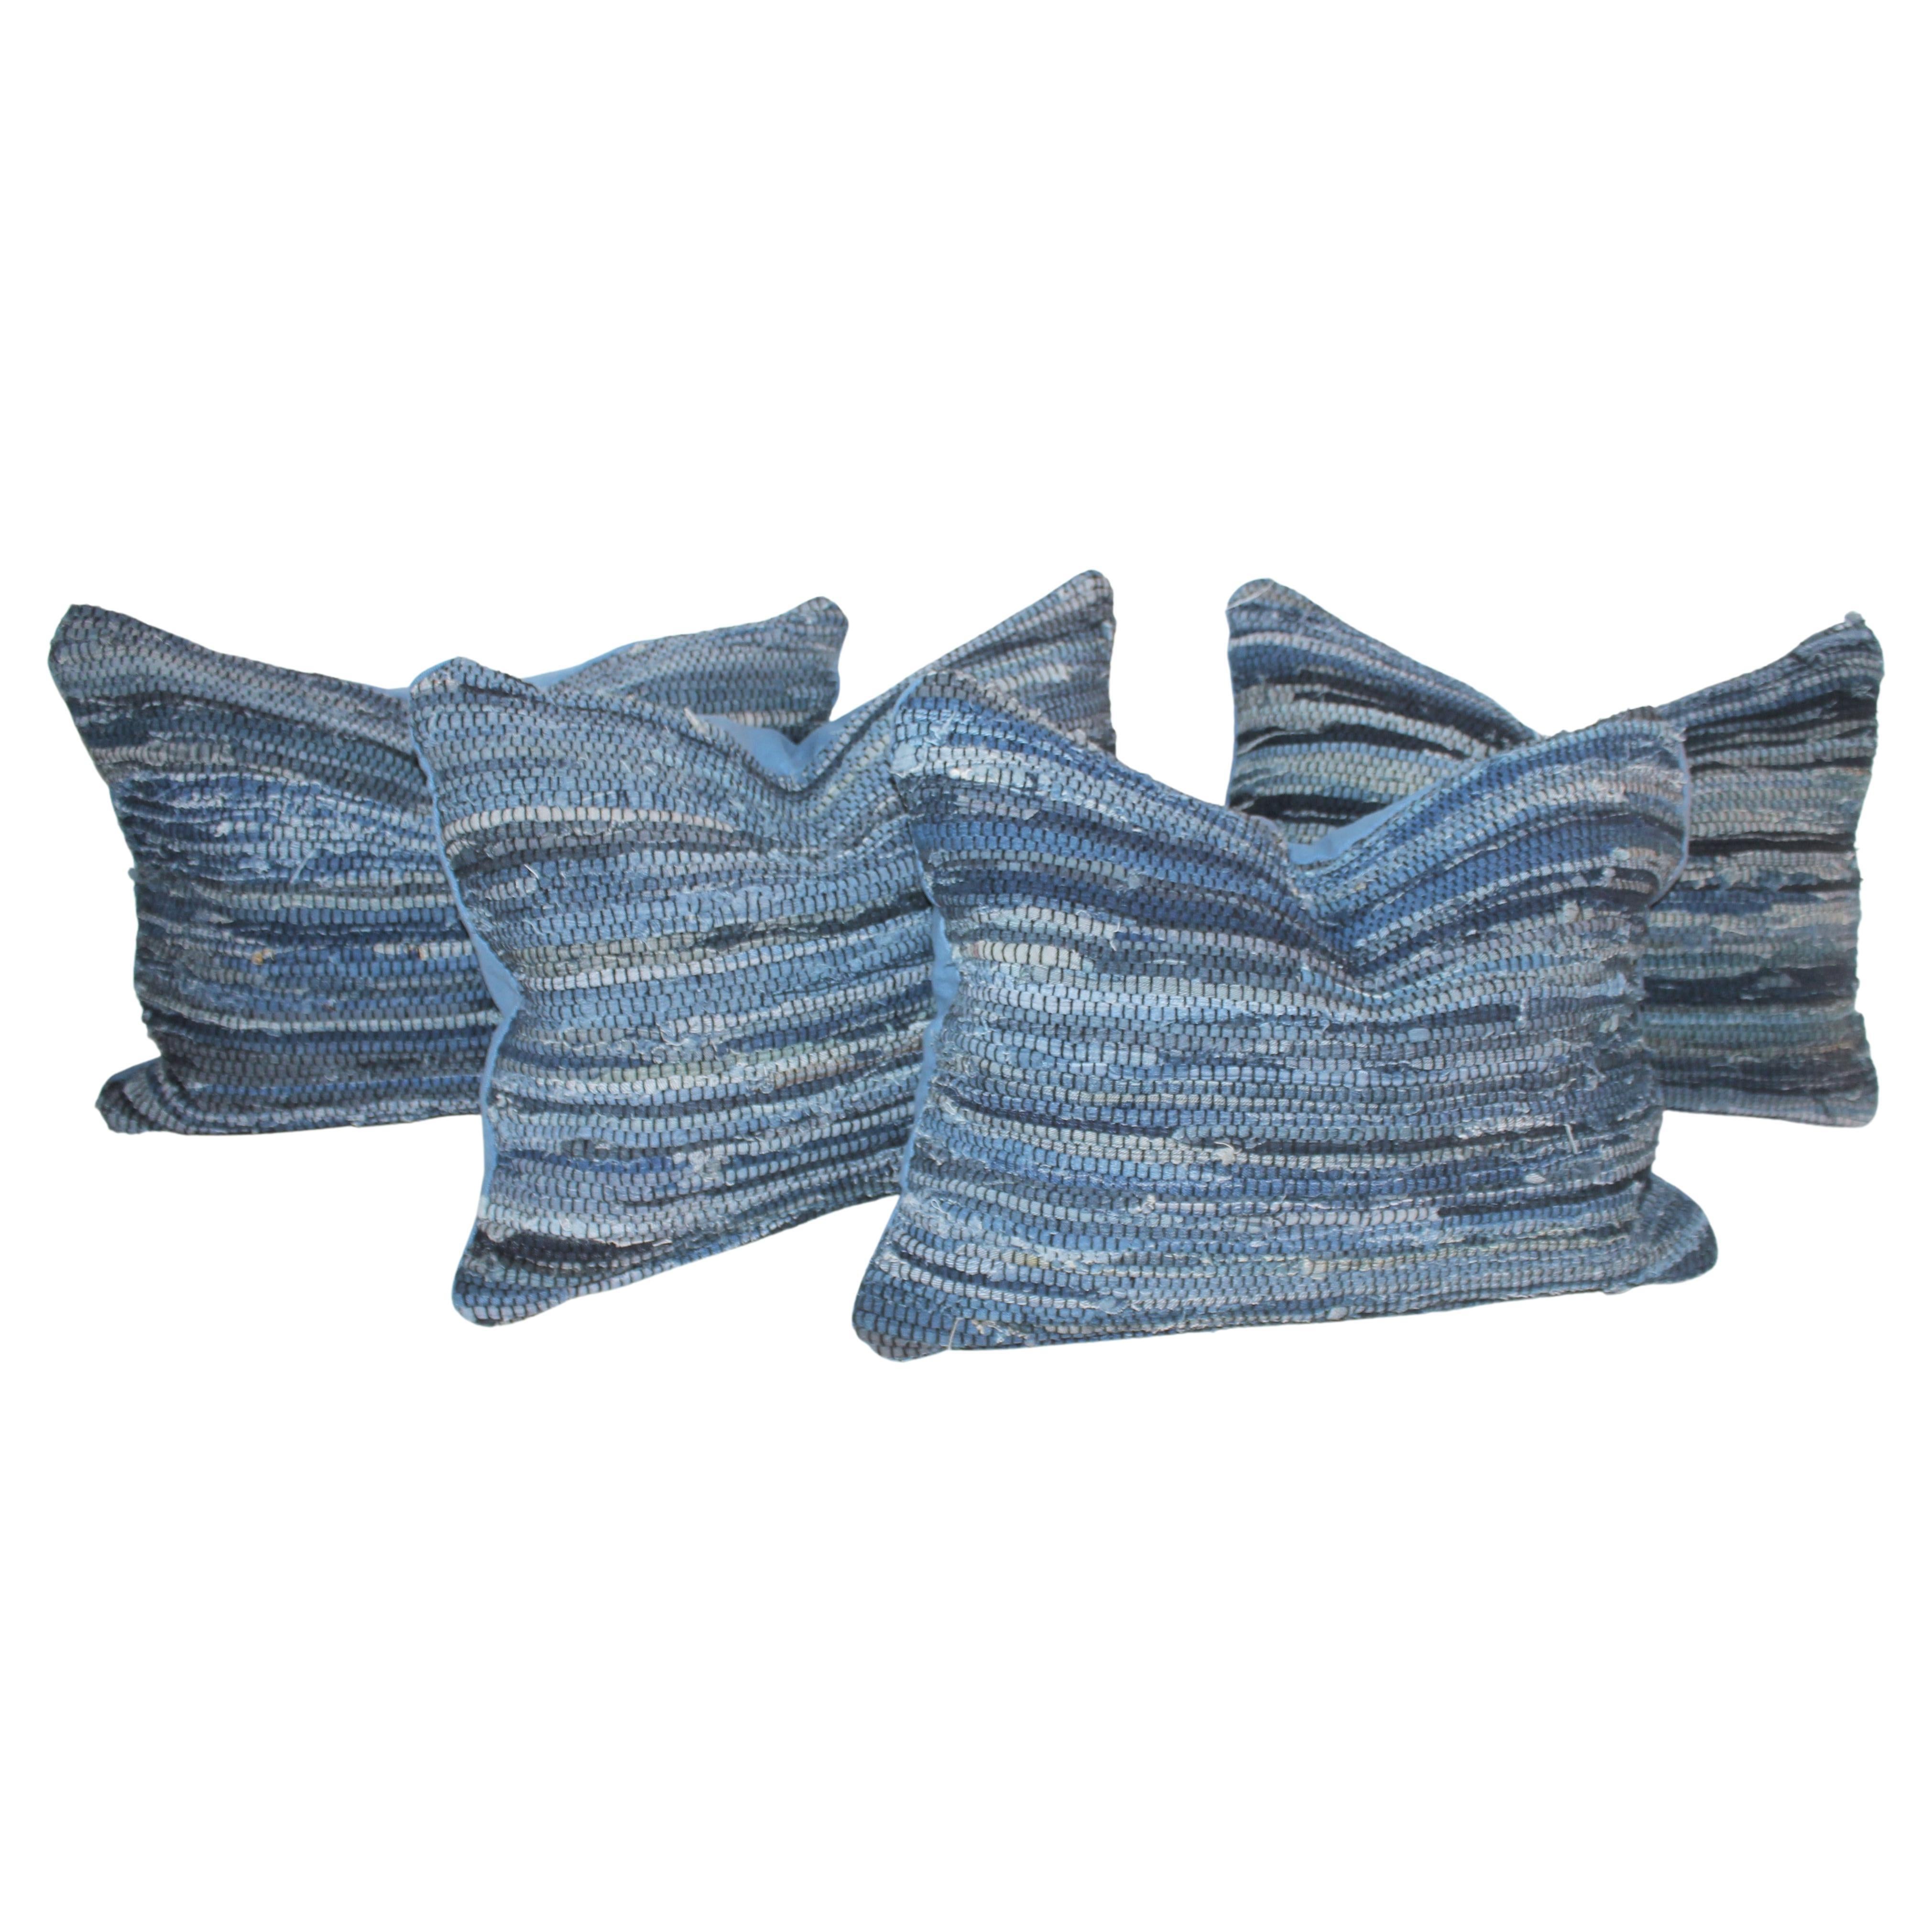 Pair of Vintage blue rag rug textile custom made pillows. (2 sets available)
 All 4 can be purchased at 595.00 per set of 2 pillows. Pillows have feather and dwon inserts and zippered casing.